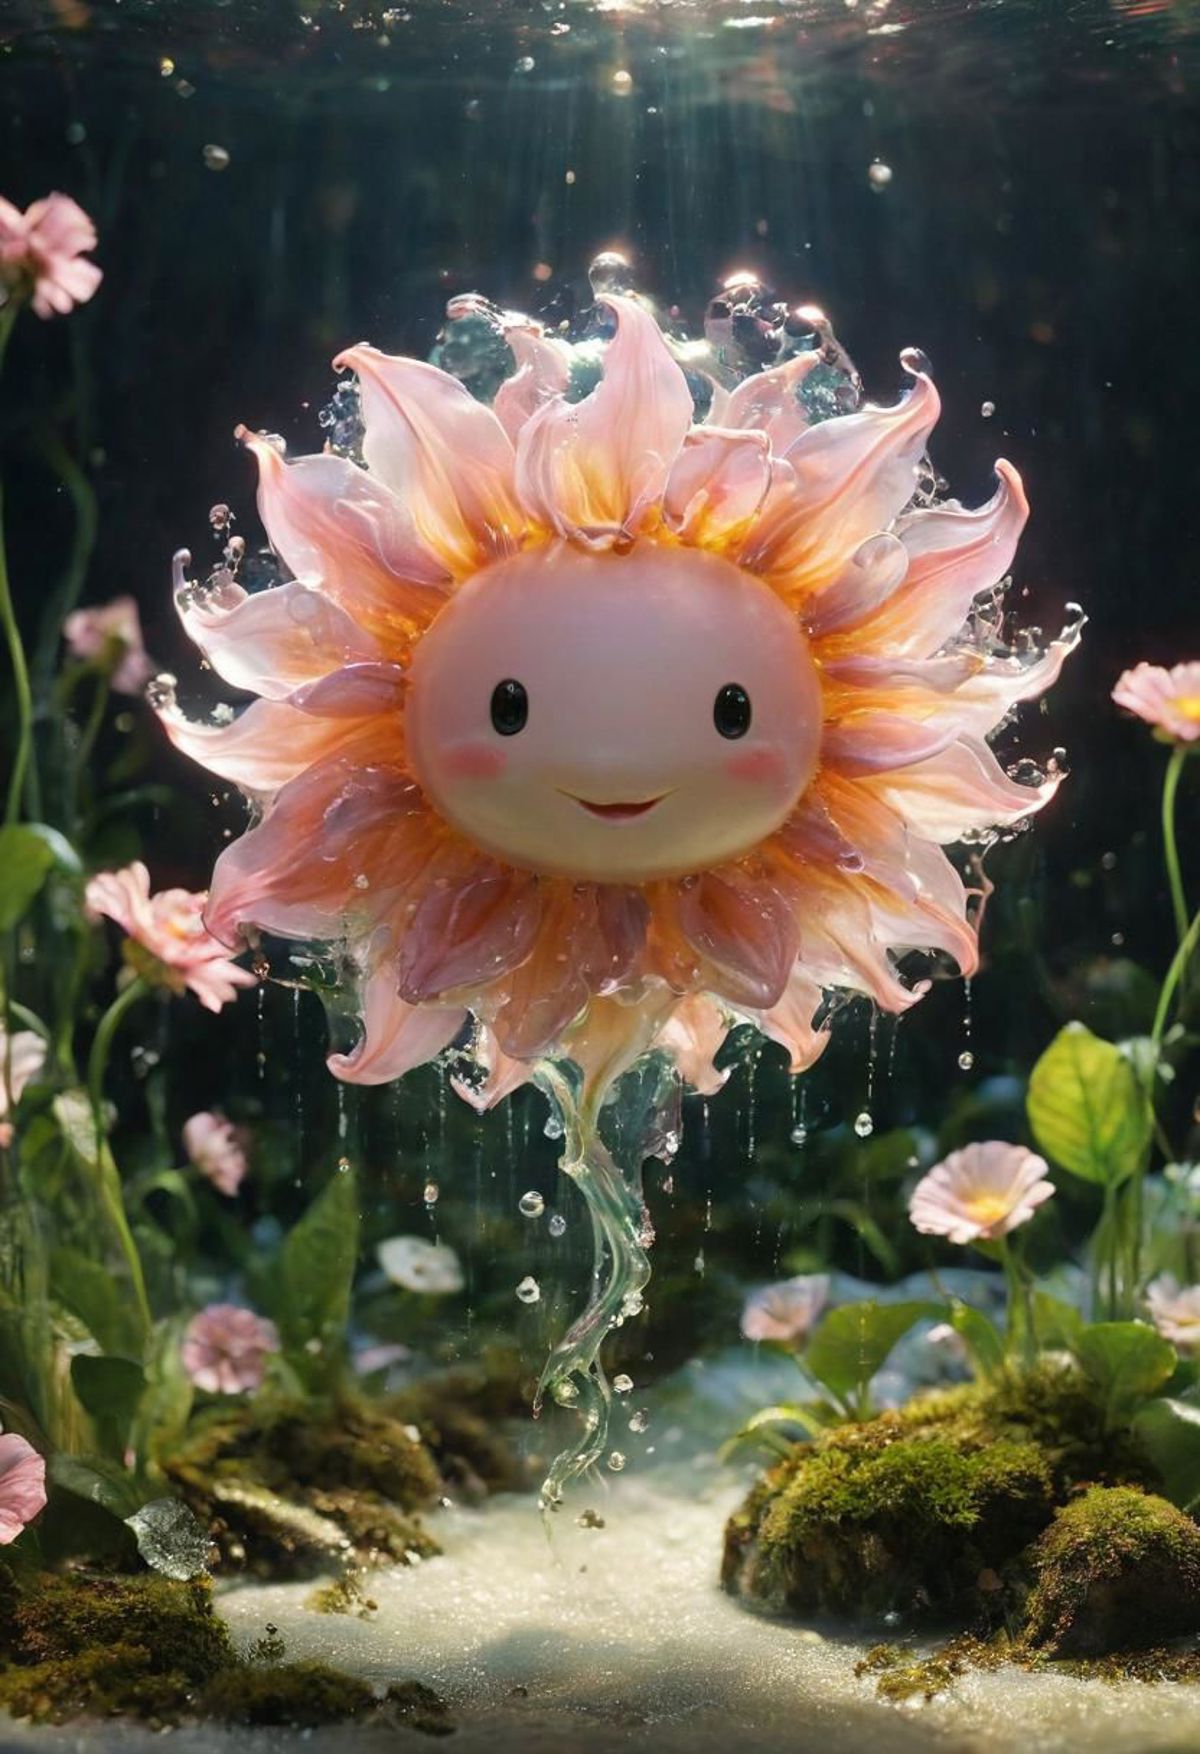 A Pink Flower with a Smiling Face in the Middle.